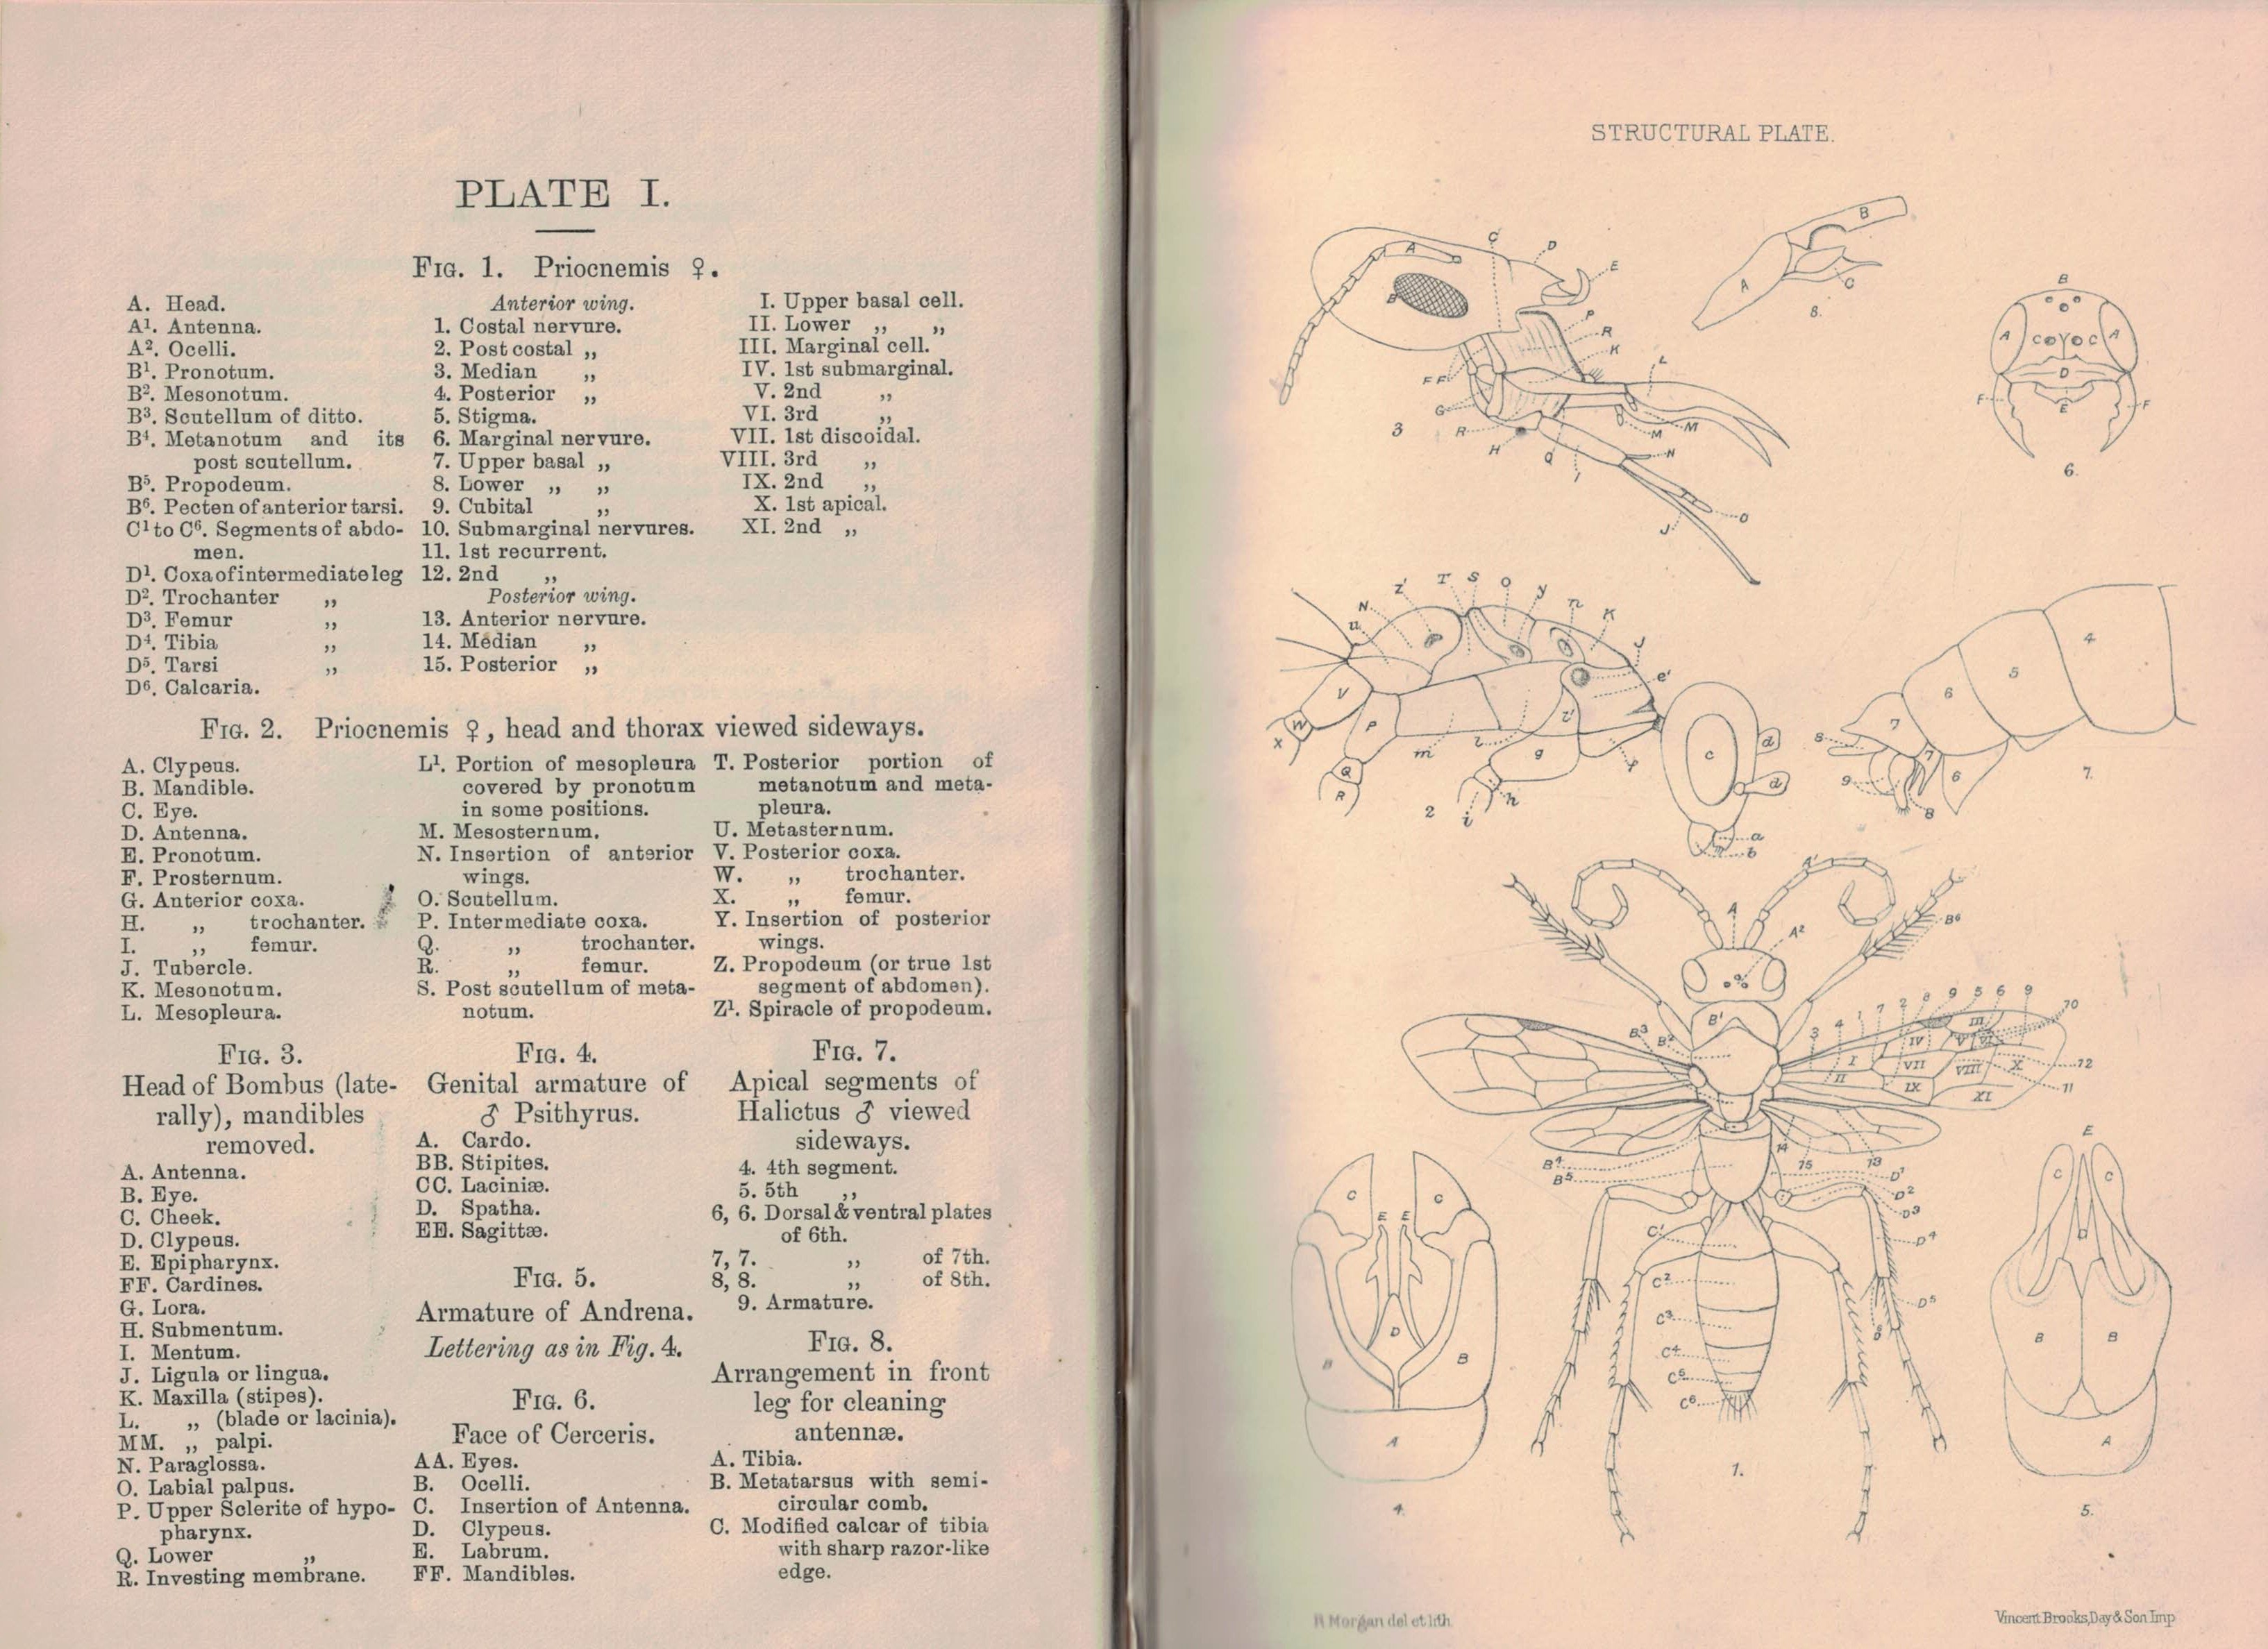 The Hymenoptera Aculeata of the British Islands. A Descriptive Account of the Families, Genera, and Species Indigenous to Great Britain and Ireland, with Notes as to Habits, Localities, Habitats, etc.